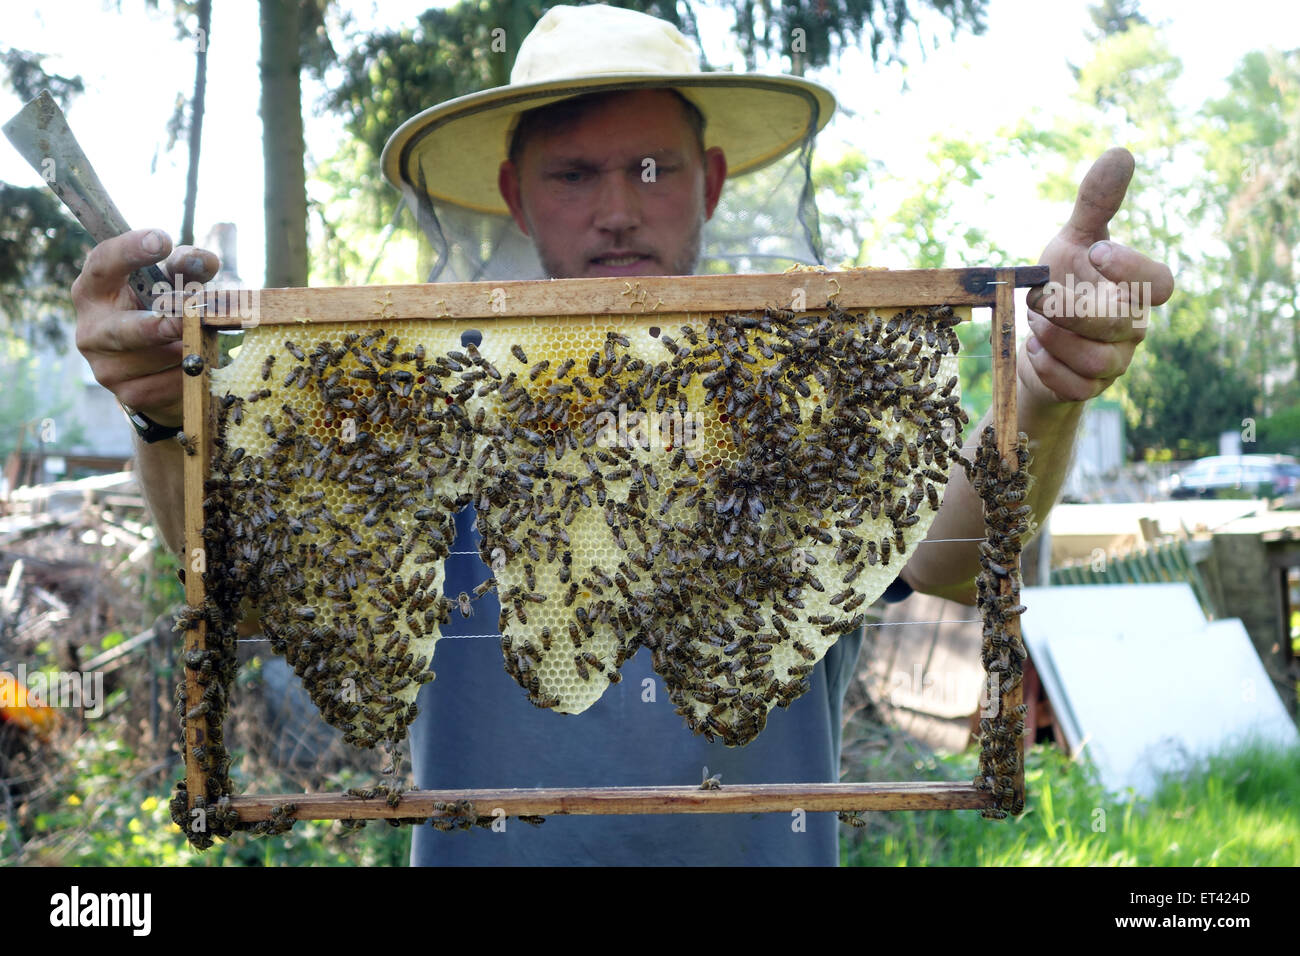 Berlin, Germany, professional beekeepers controls a brood comb his colony Stock Photo